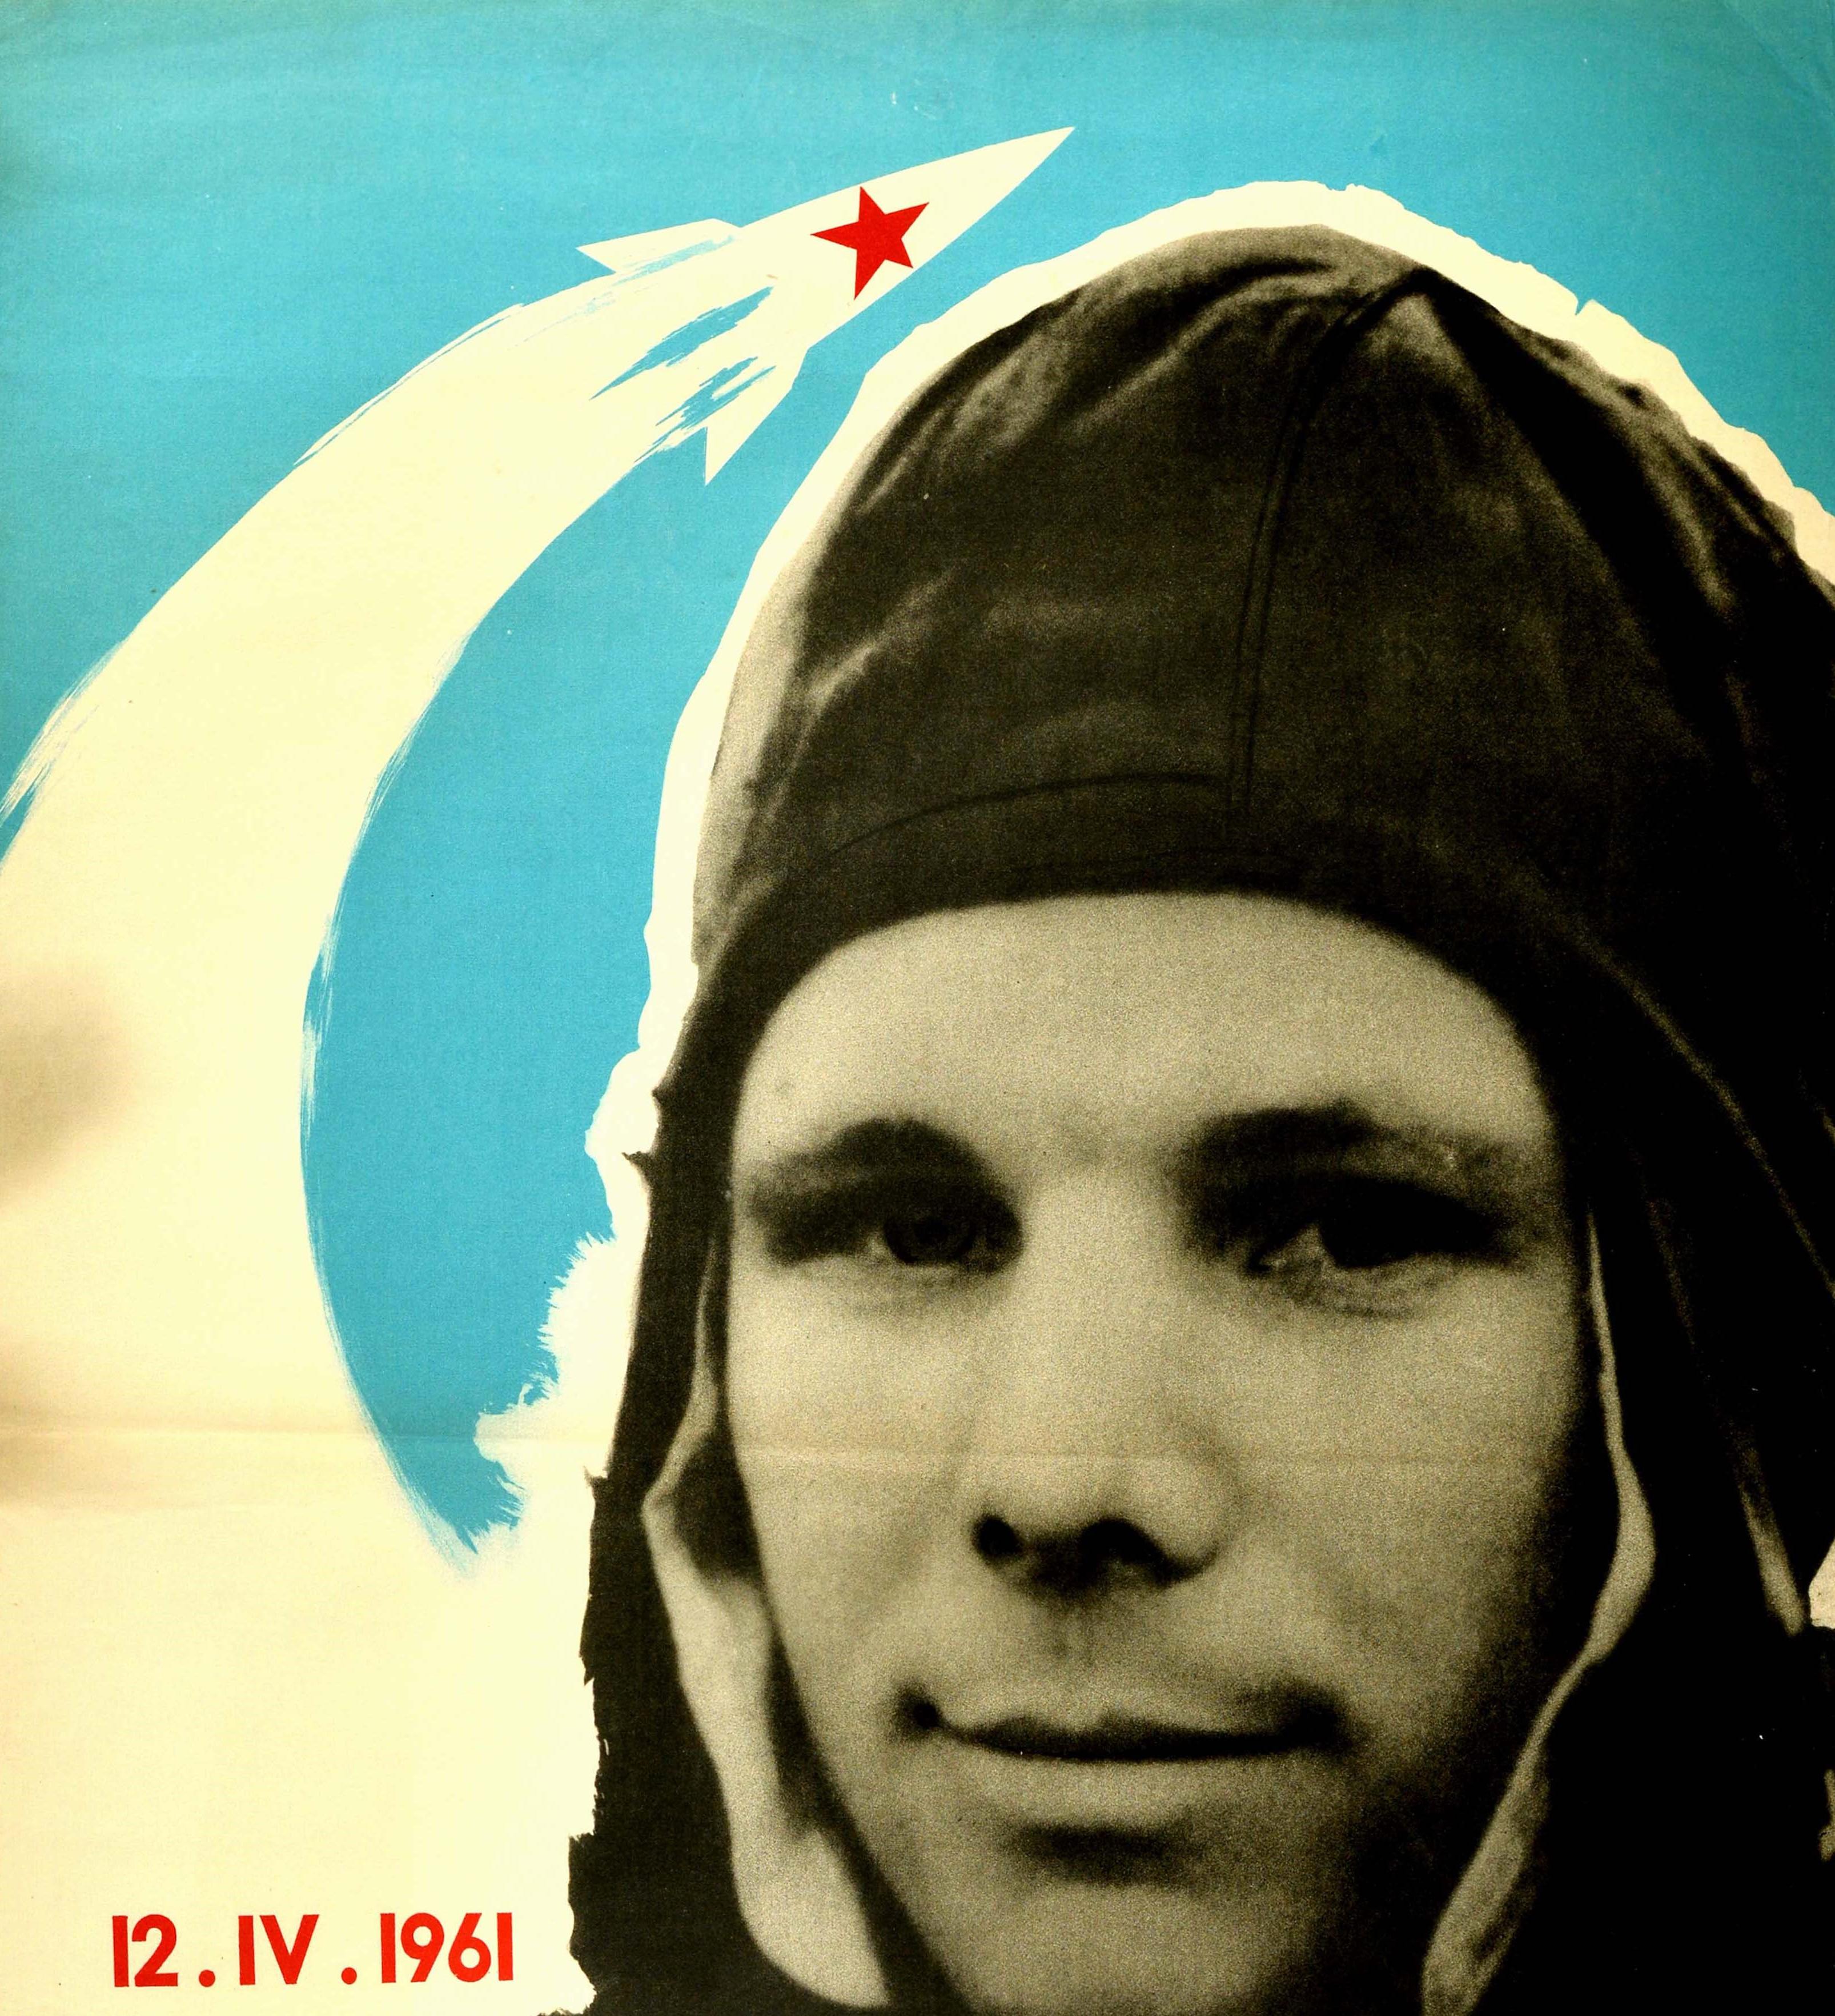 Original Vintage Poster Glory To The First Cosmonaut Pilot Major Yuri Gagarin - Print by Unknown